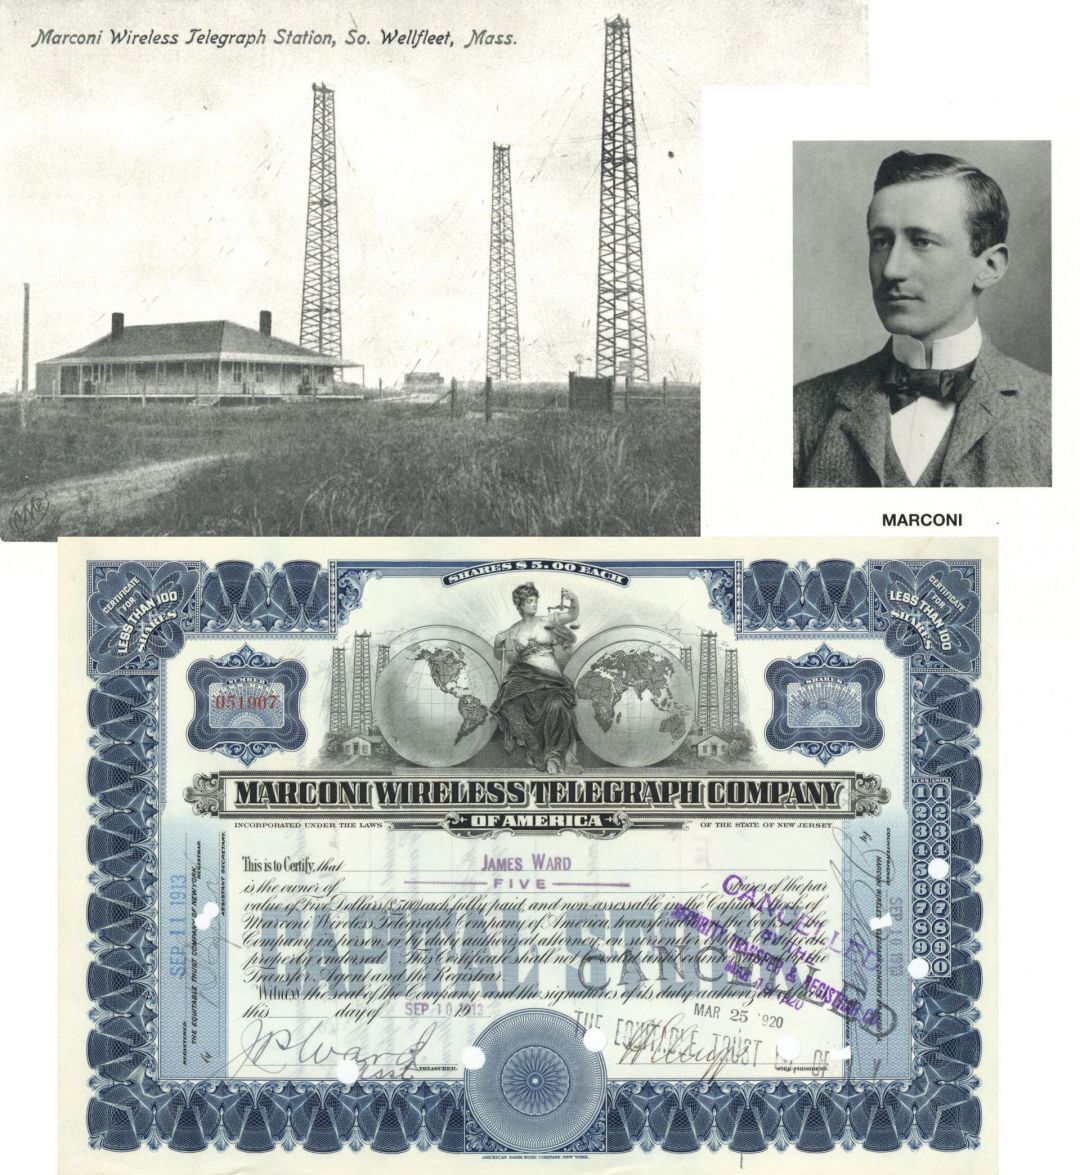 Marconi Wireless Telegraph Co. - Company was Aboard the Titanic - dated 1913-20 